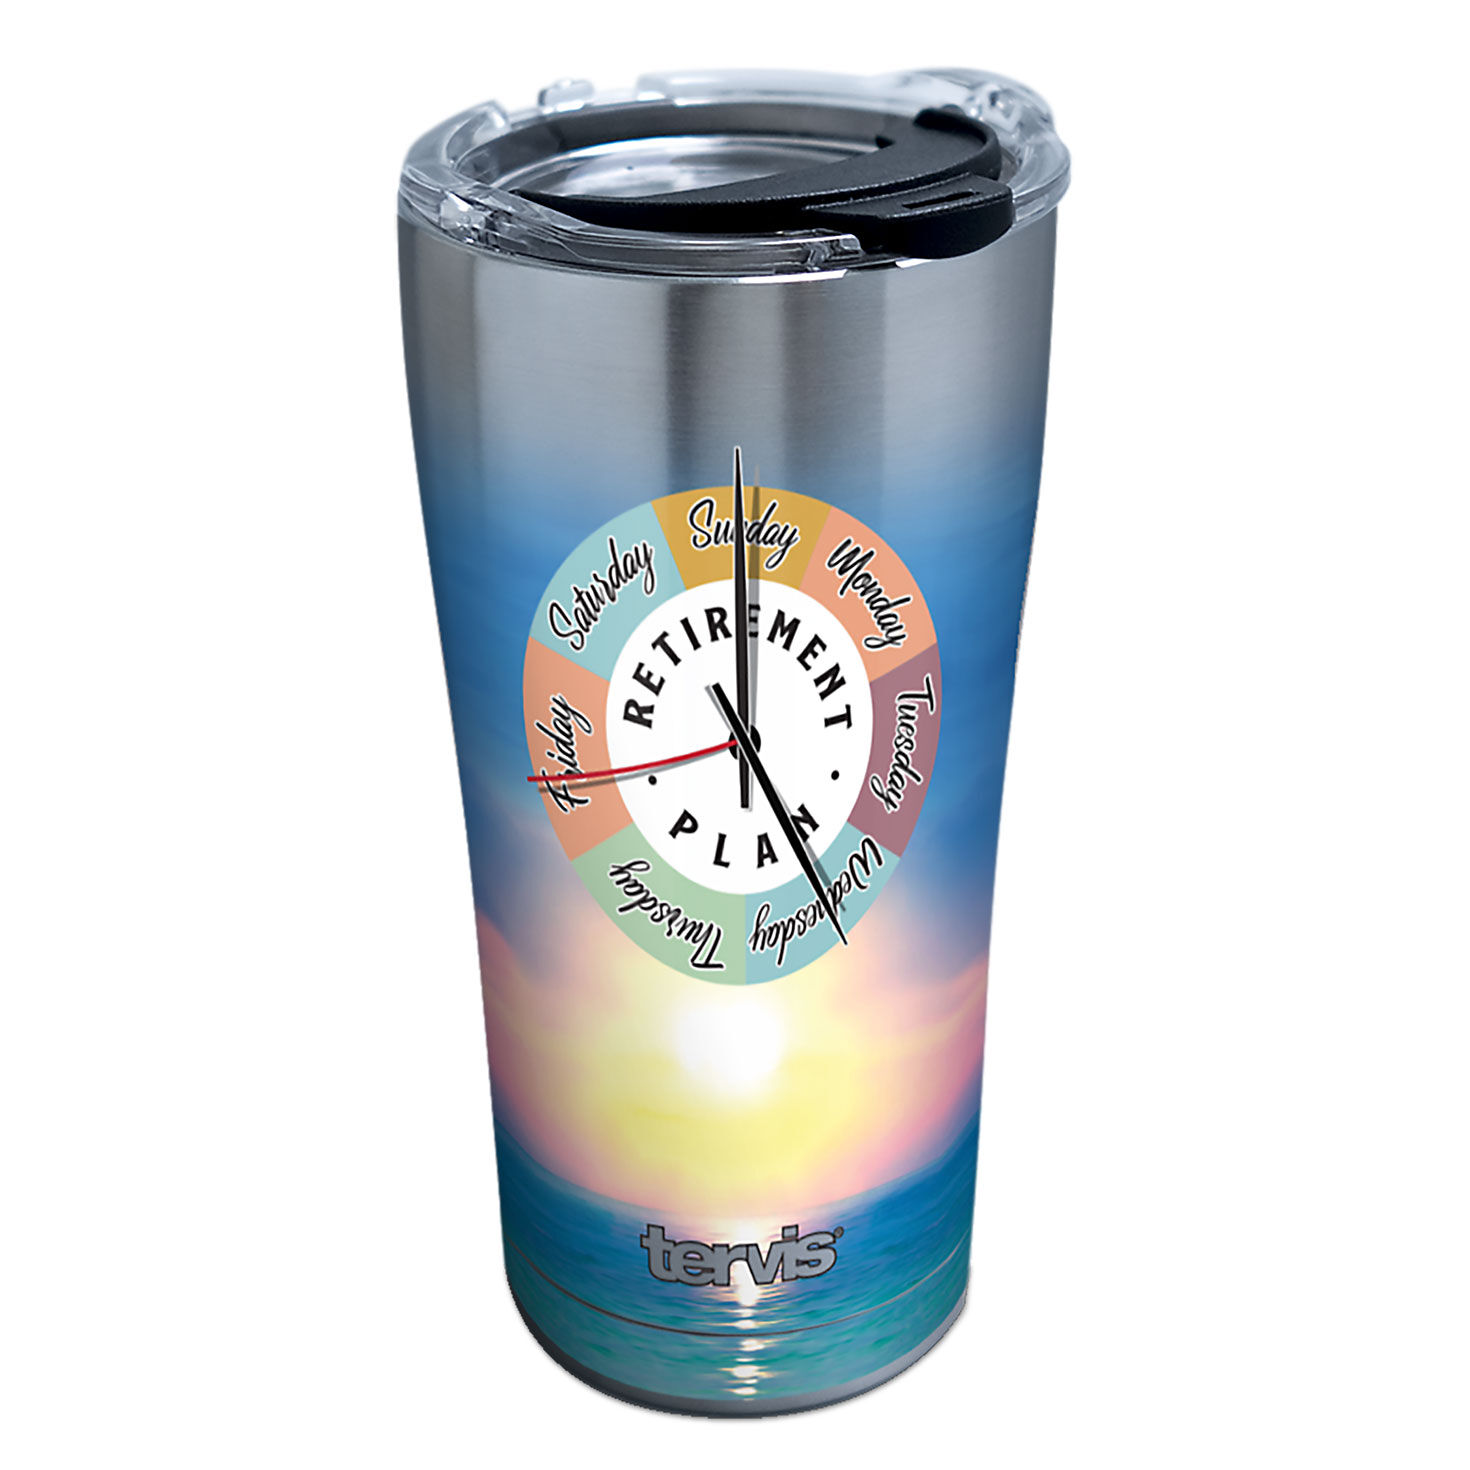 https://www.hallmark.com/dw/image/v2/AALB_PRD/on/demandware.static/-/Sites-hallmark-master/default/dw2fa32411/images/finished-goods/products/1352263/Tervis-Retirement-Clock-Insulated-Stainless-Steel-Cup_1352263_01.jpg?sfrm=jpg